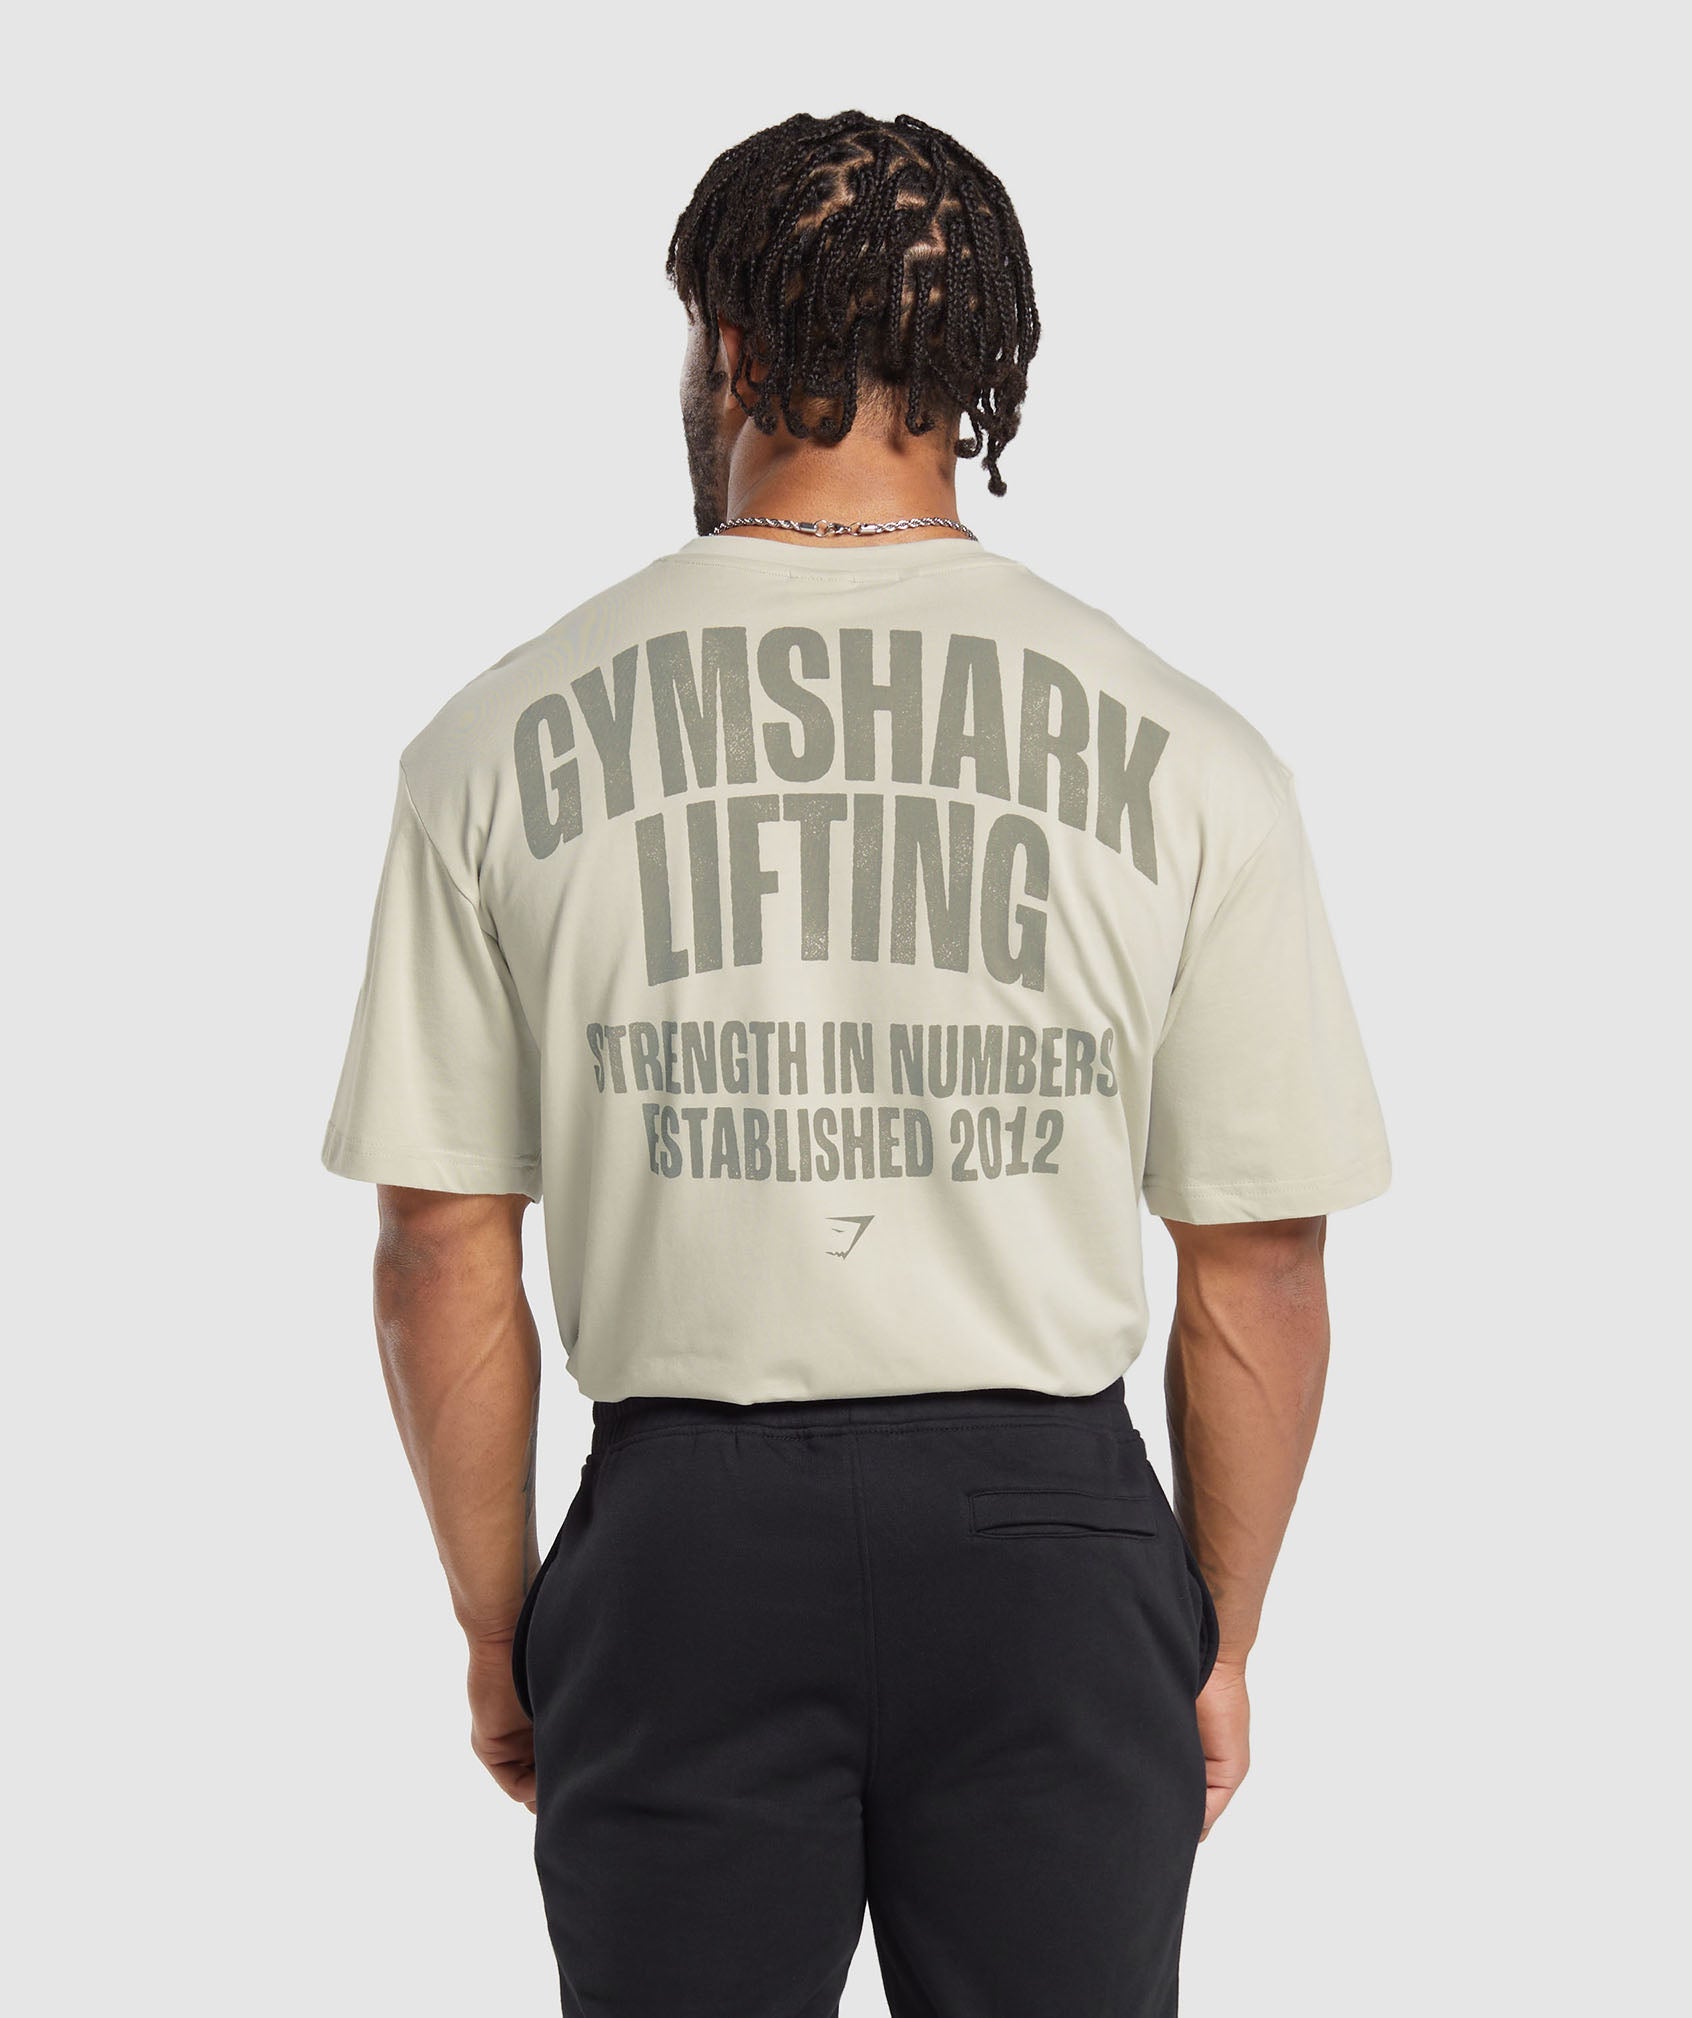 Lifting T-Shirt in Pebble Grey is out of stock